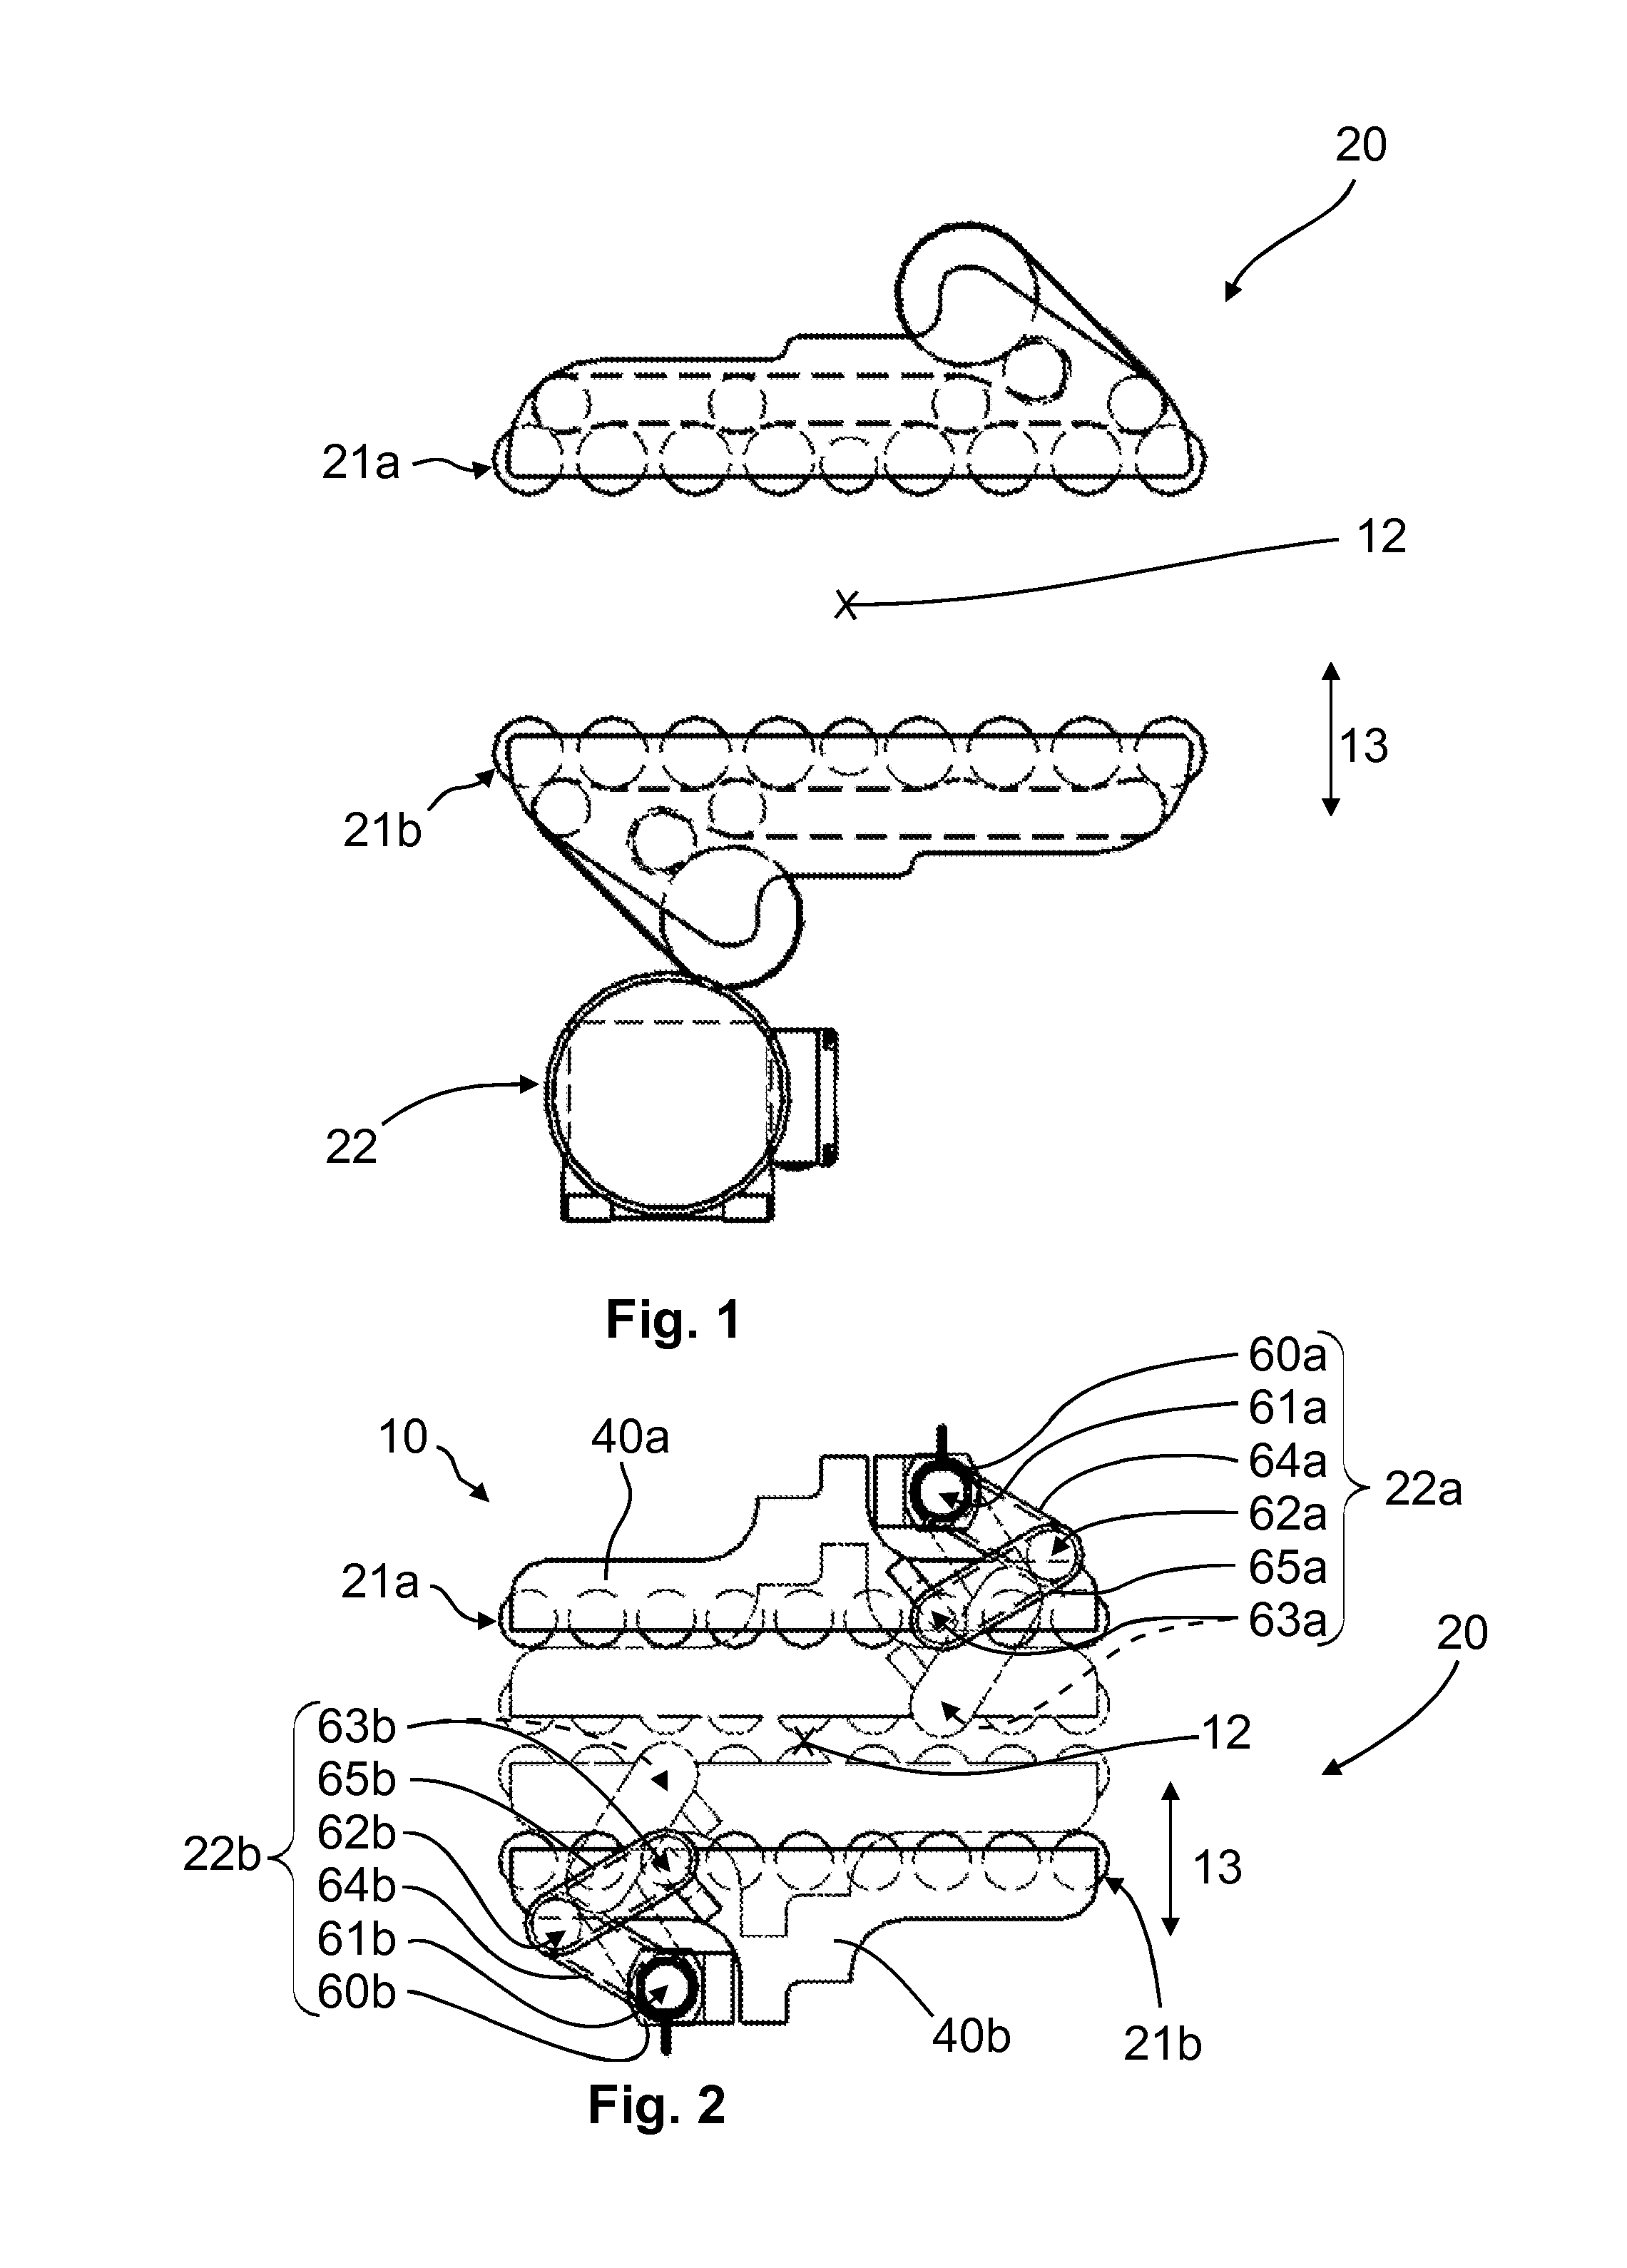 Device for turning over and conveying an object